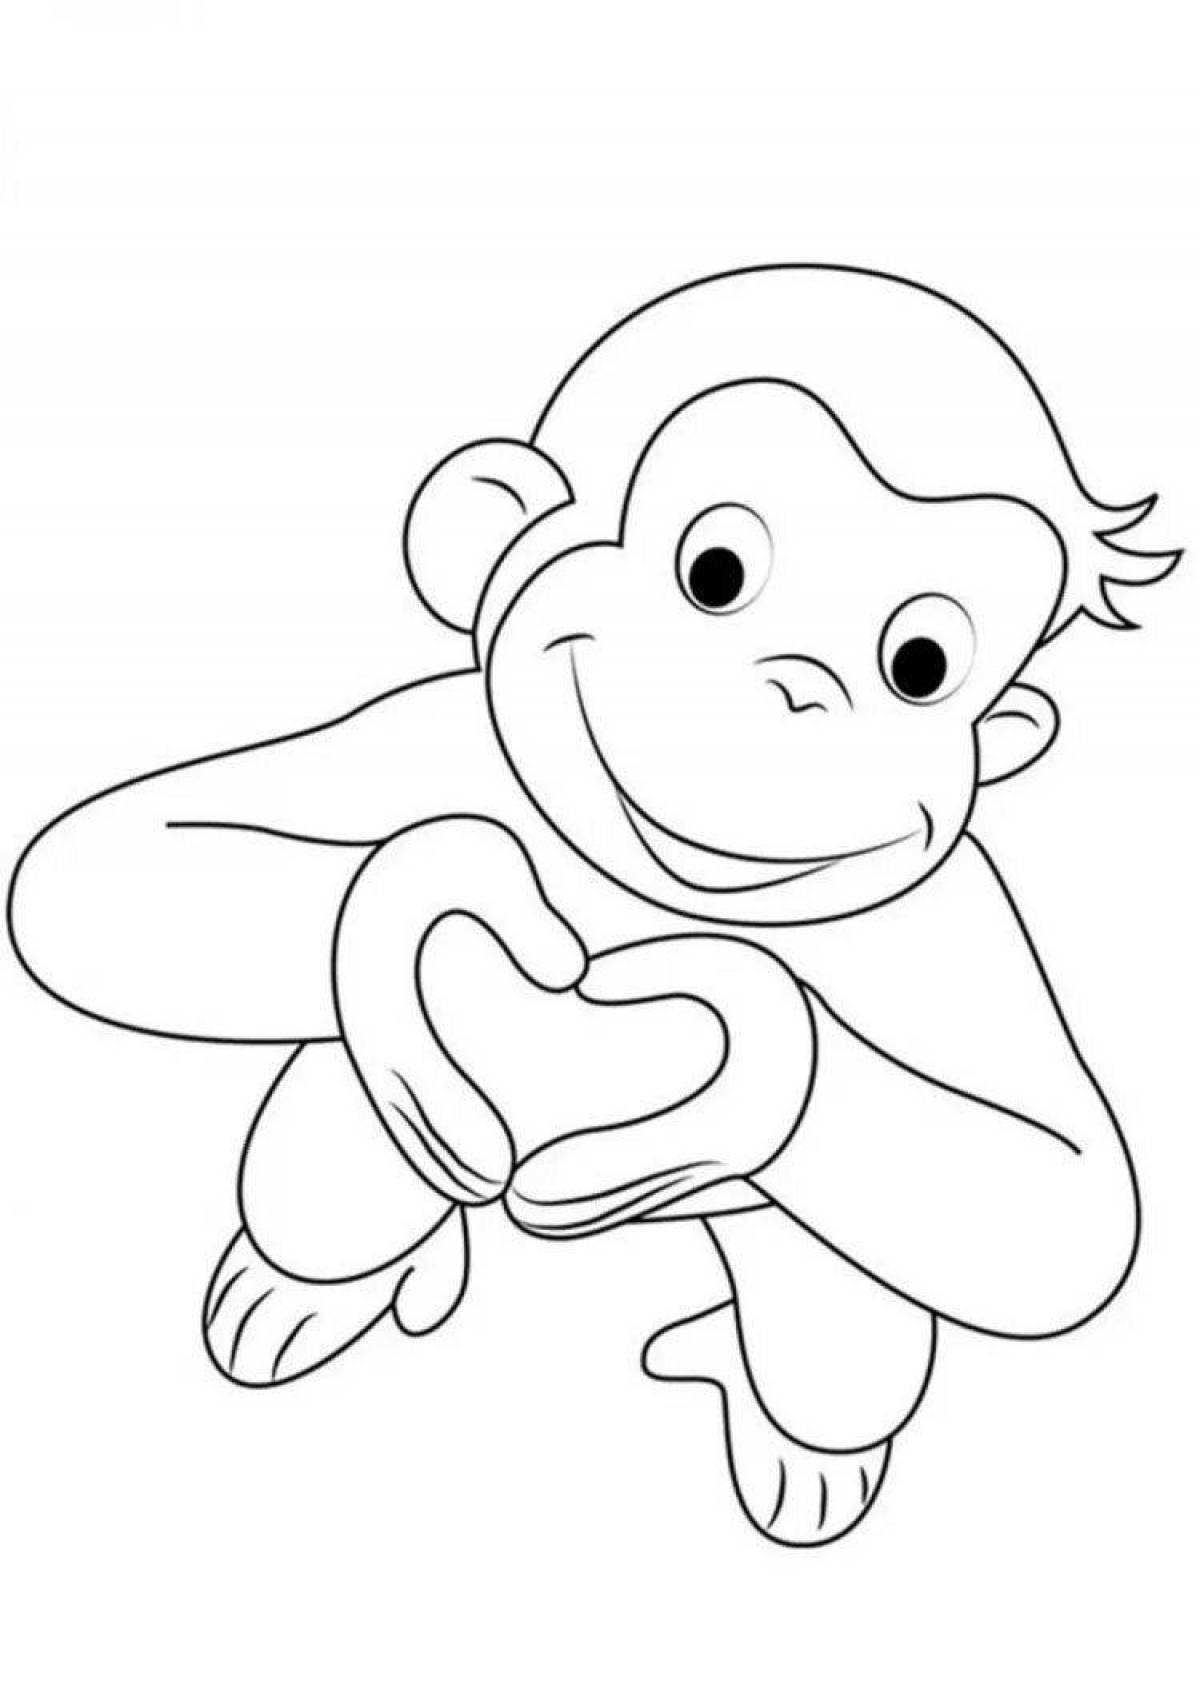 Glowing toque coloring page